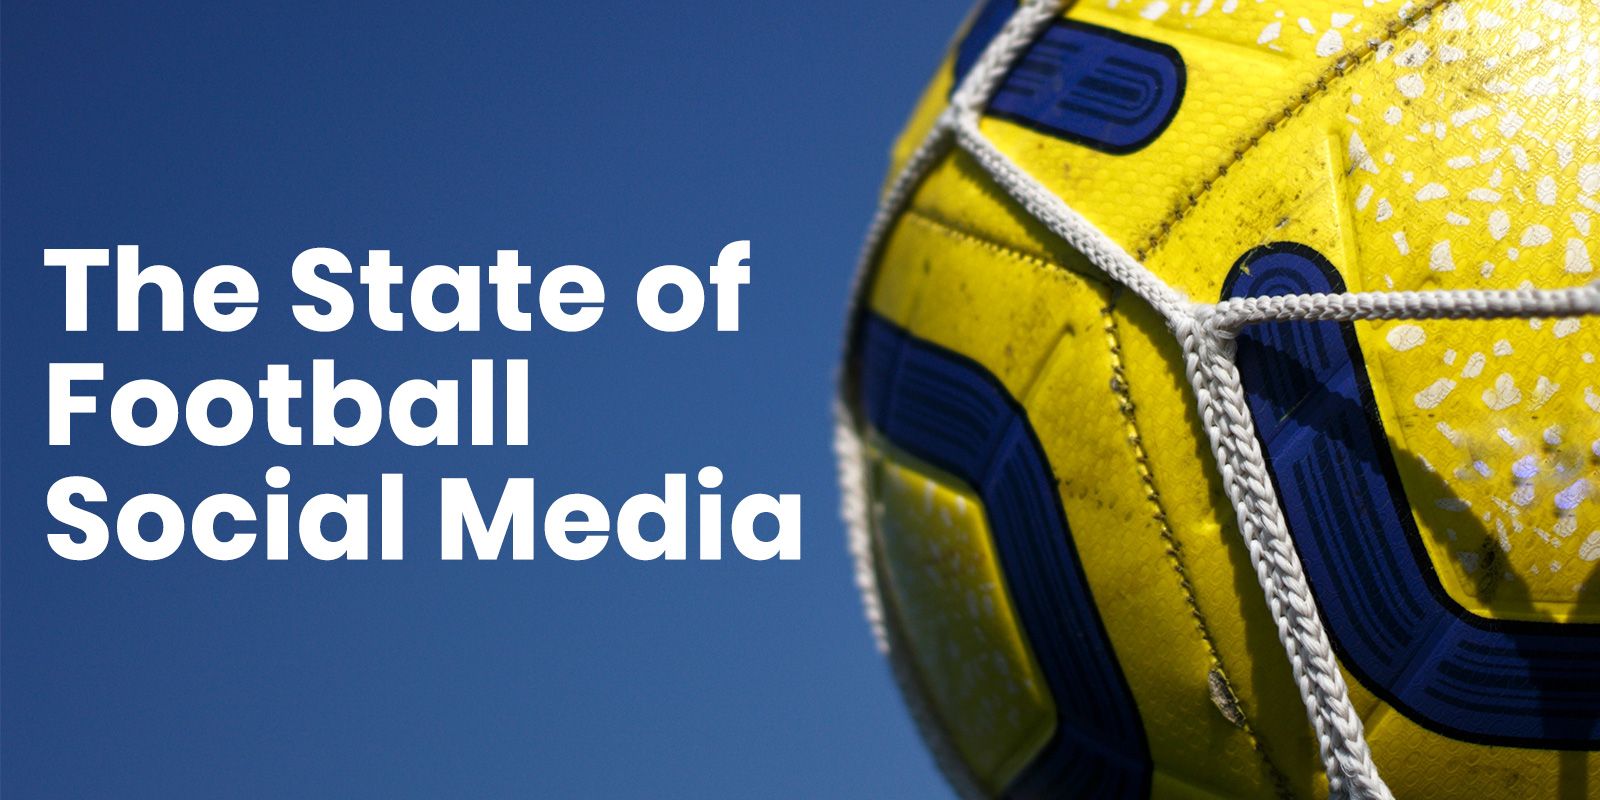 The State of Football Social Media 2021: The Results